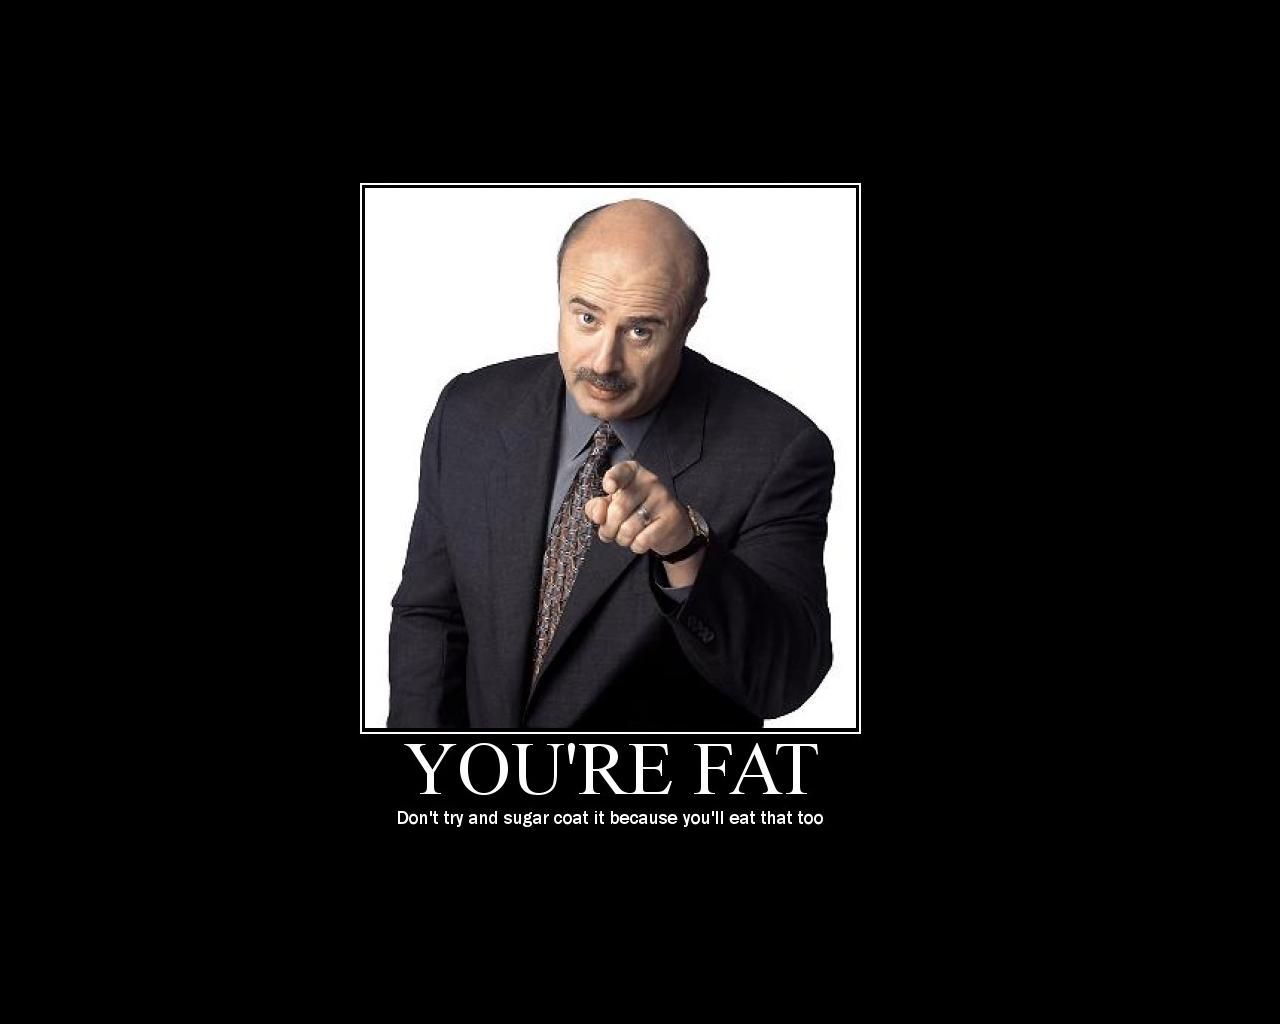 Dr phil demotivational wallpaper - - High Quality and other